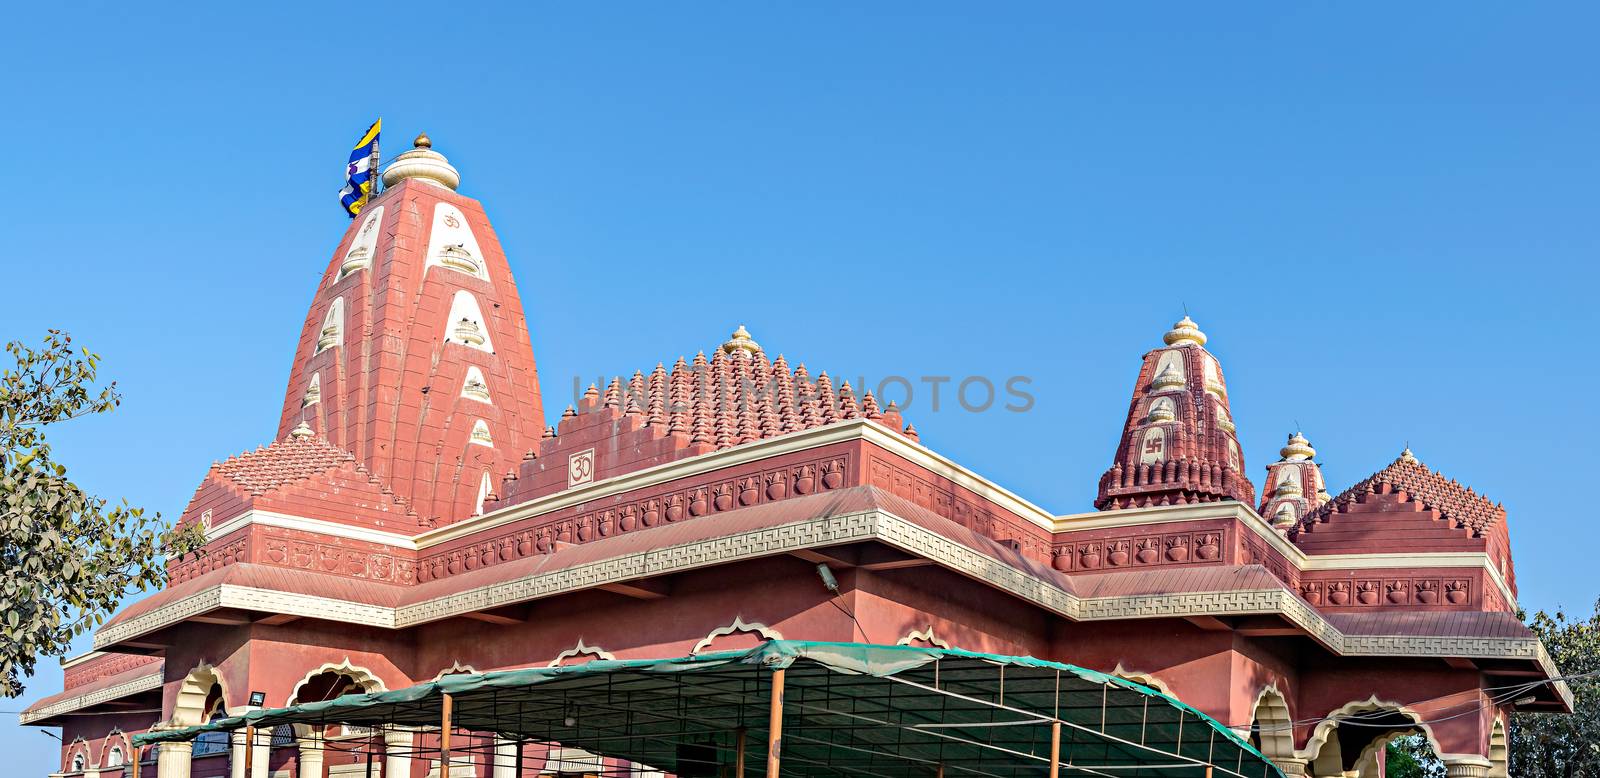 Nageshwar temple in Gujarat, India, is one of the Dwadash Jyotir by lalam